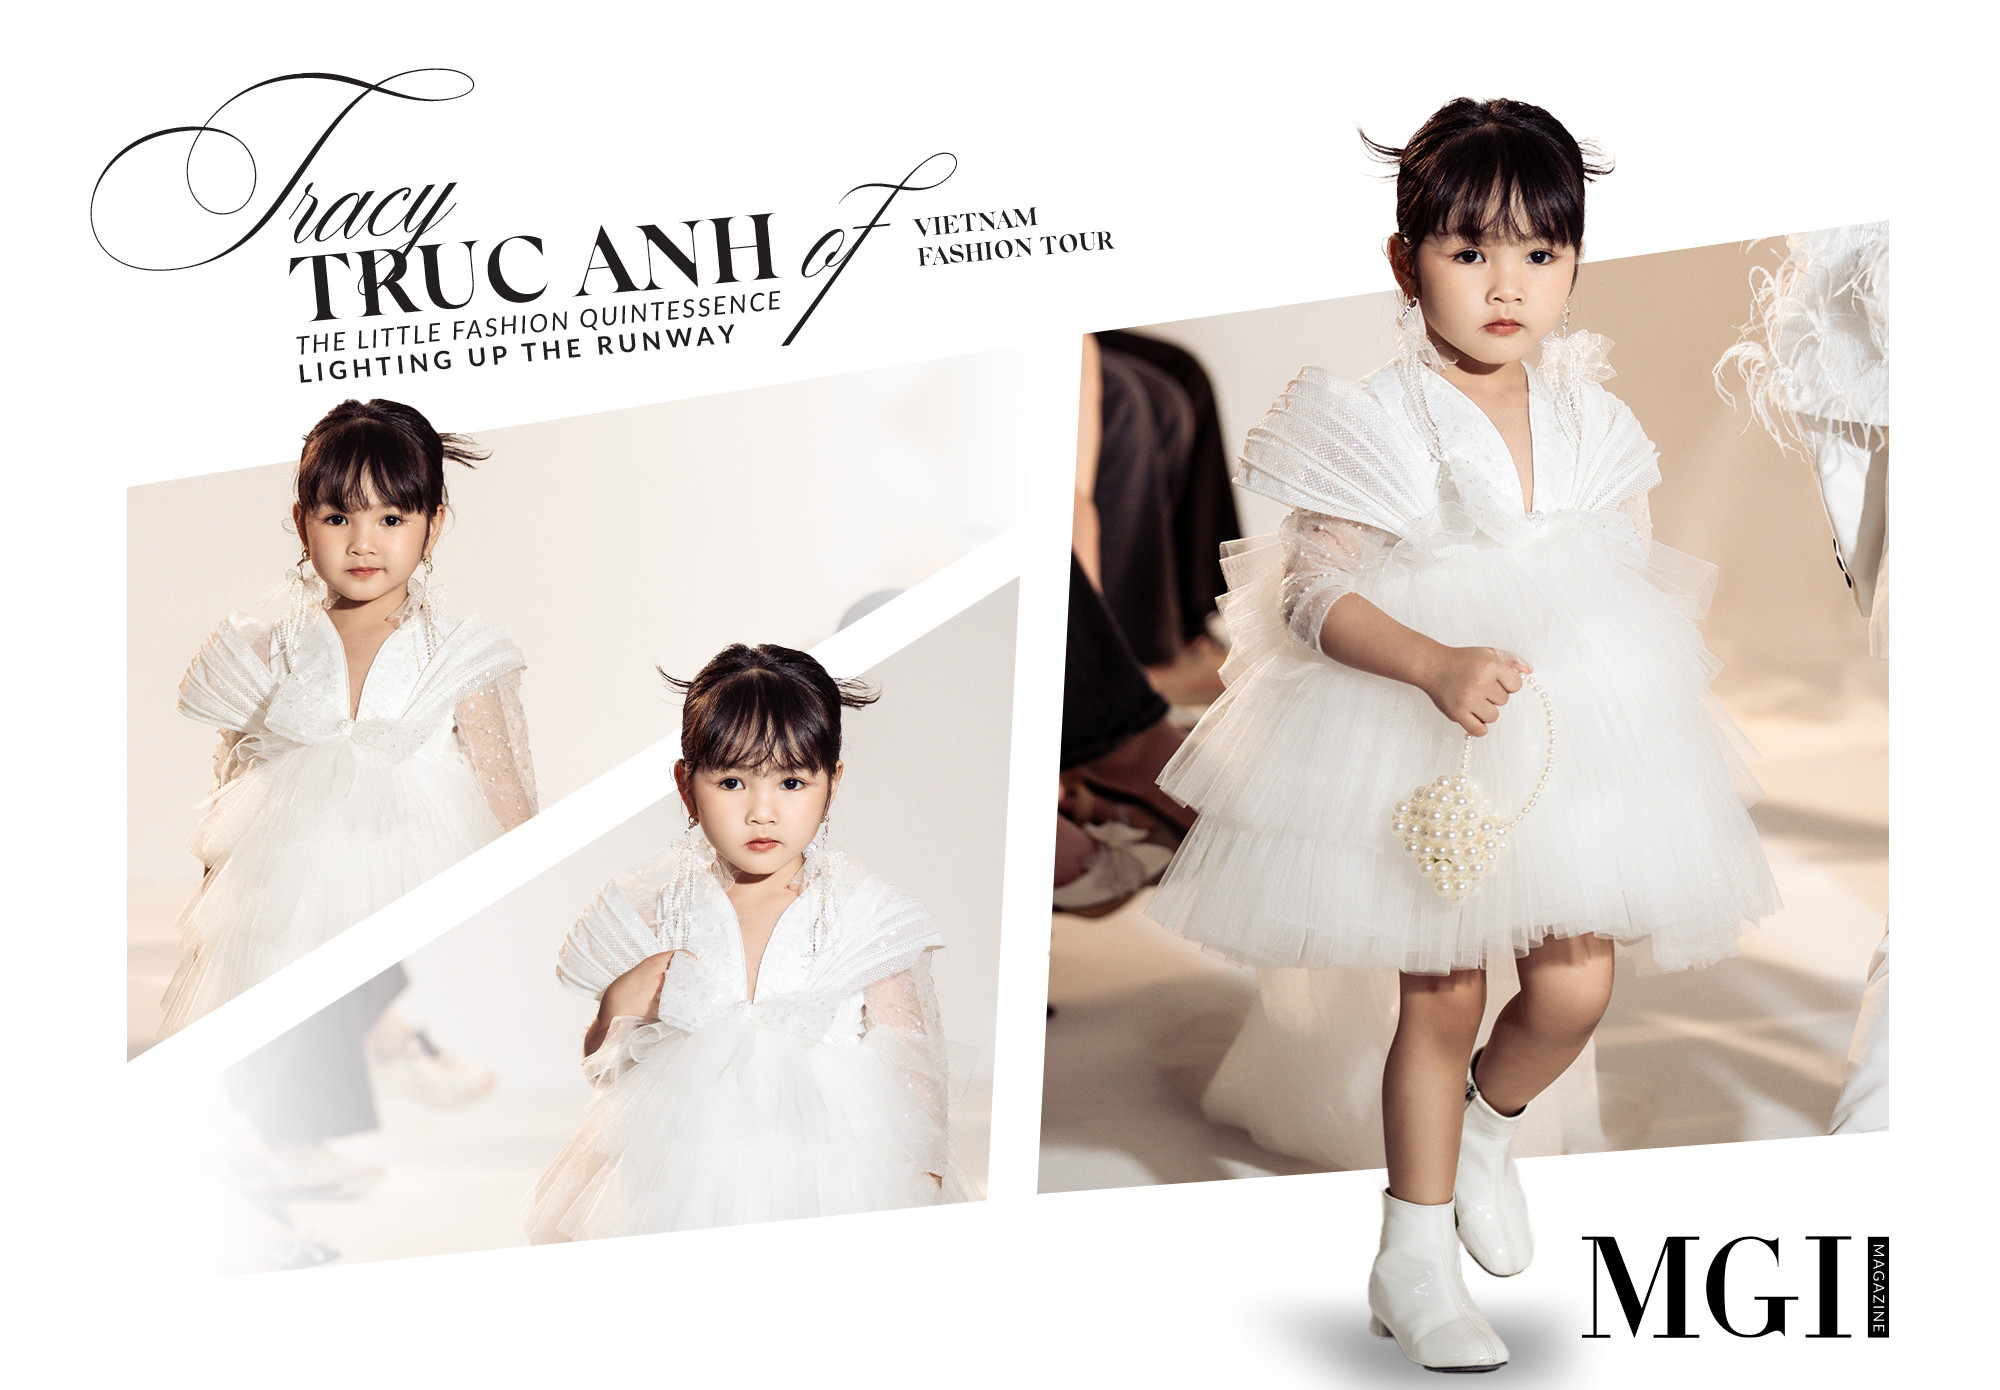 Tracy Truc Anh - the little warrior lighting up the stage of Vietnam Fashion Tour